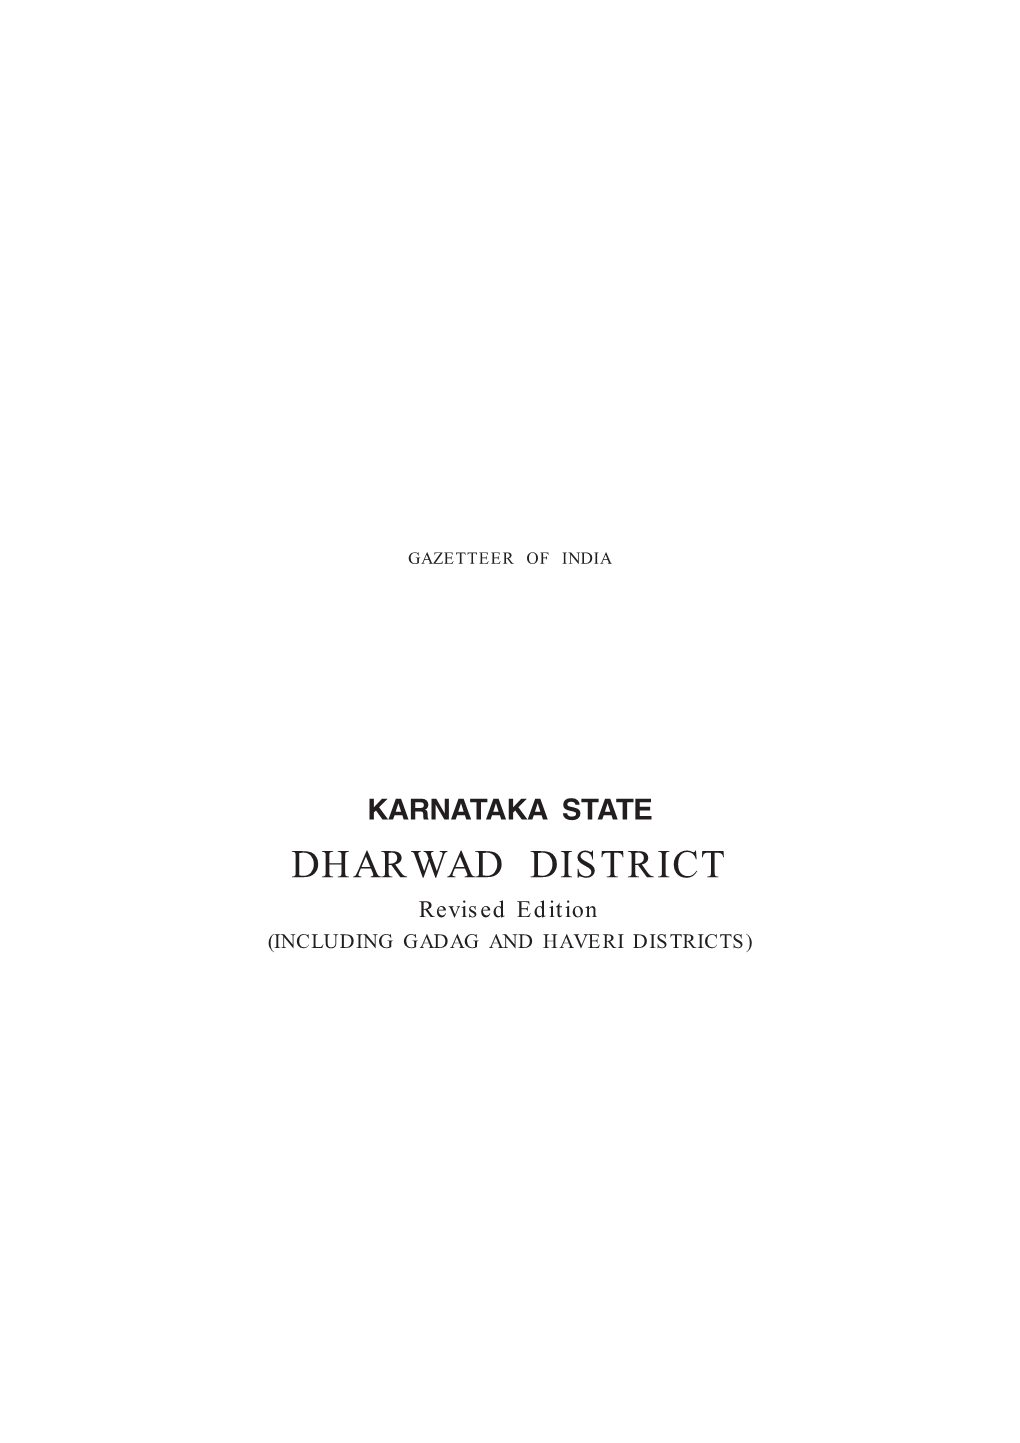 DHARWAD DISTRICT Revised Edition (INCLUDING GADAG and HAVERI DISTRICTS) GAZETTEER of INDIA